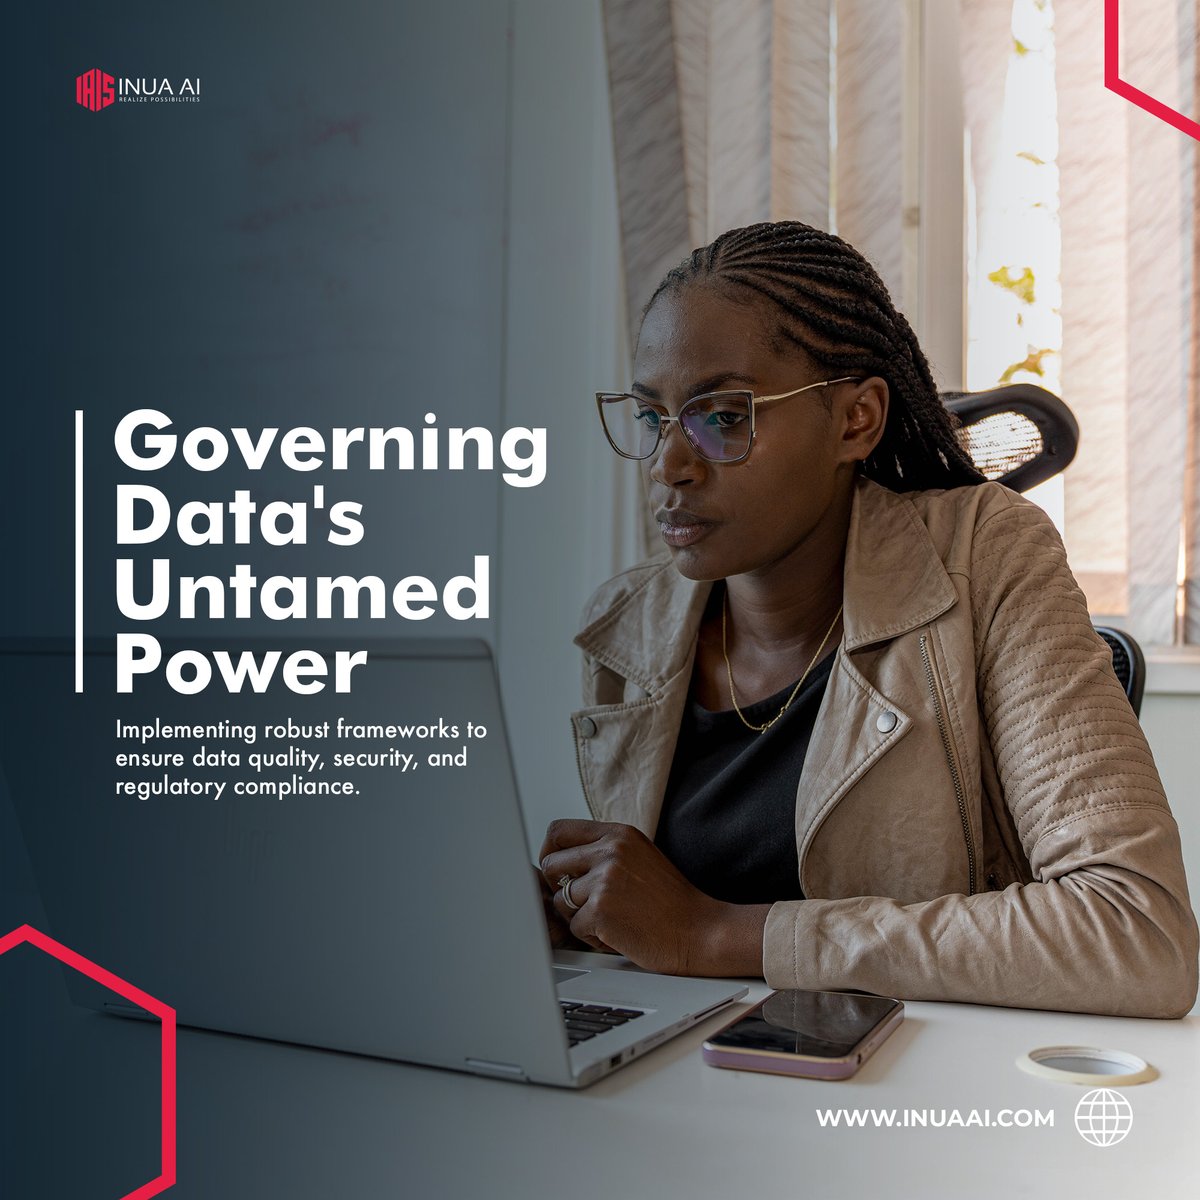 Data governance is the key to unlocking your data's true potential. 🔑 Our Data Science Service @INUA_AI specializes in implementing comprehensive governance strategies to ensure data quality, security, and compliance – empowering you to make data-driven decisions with